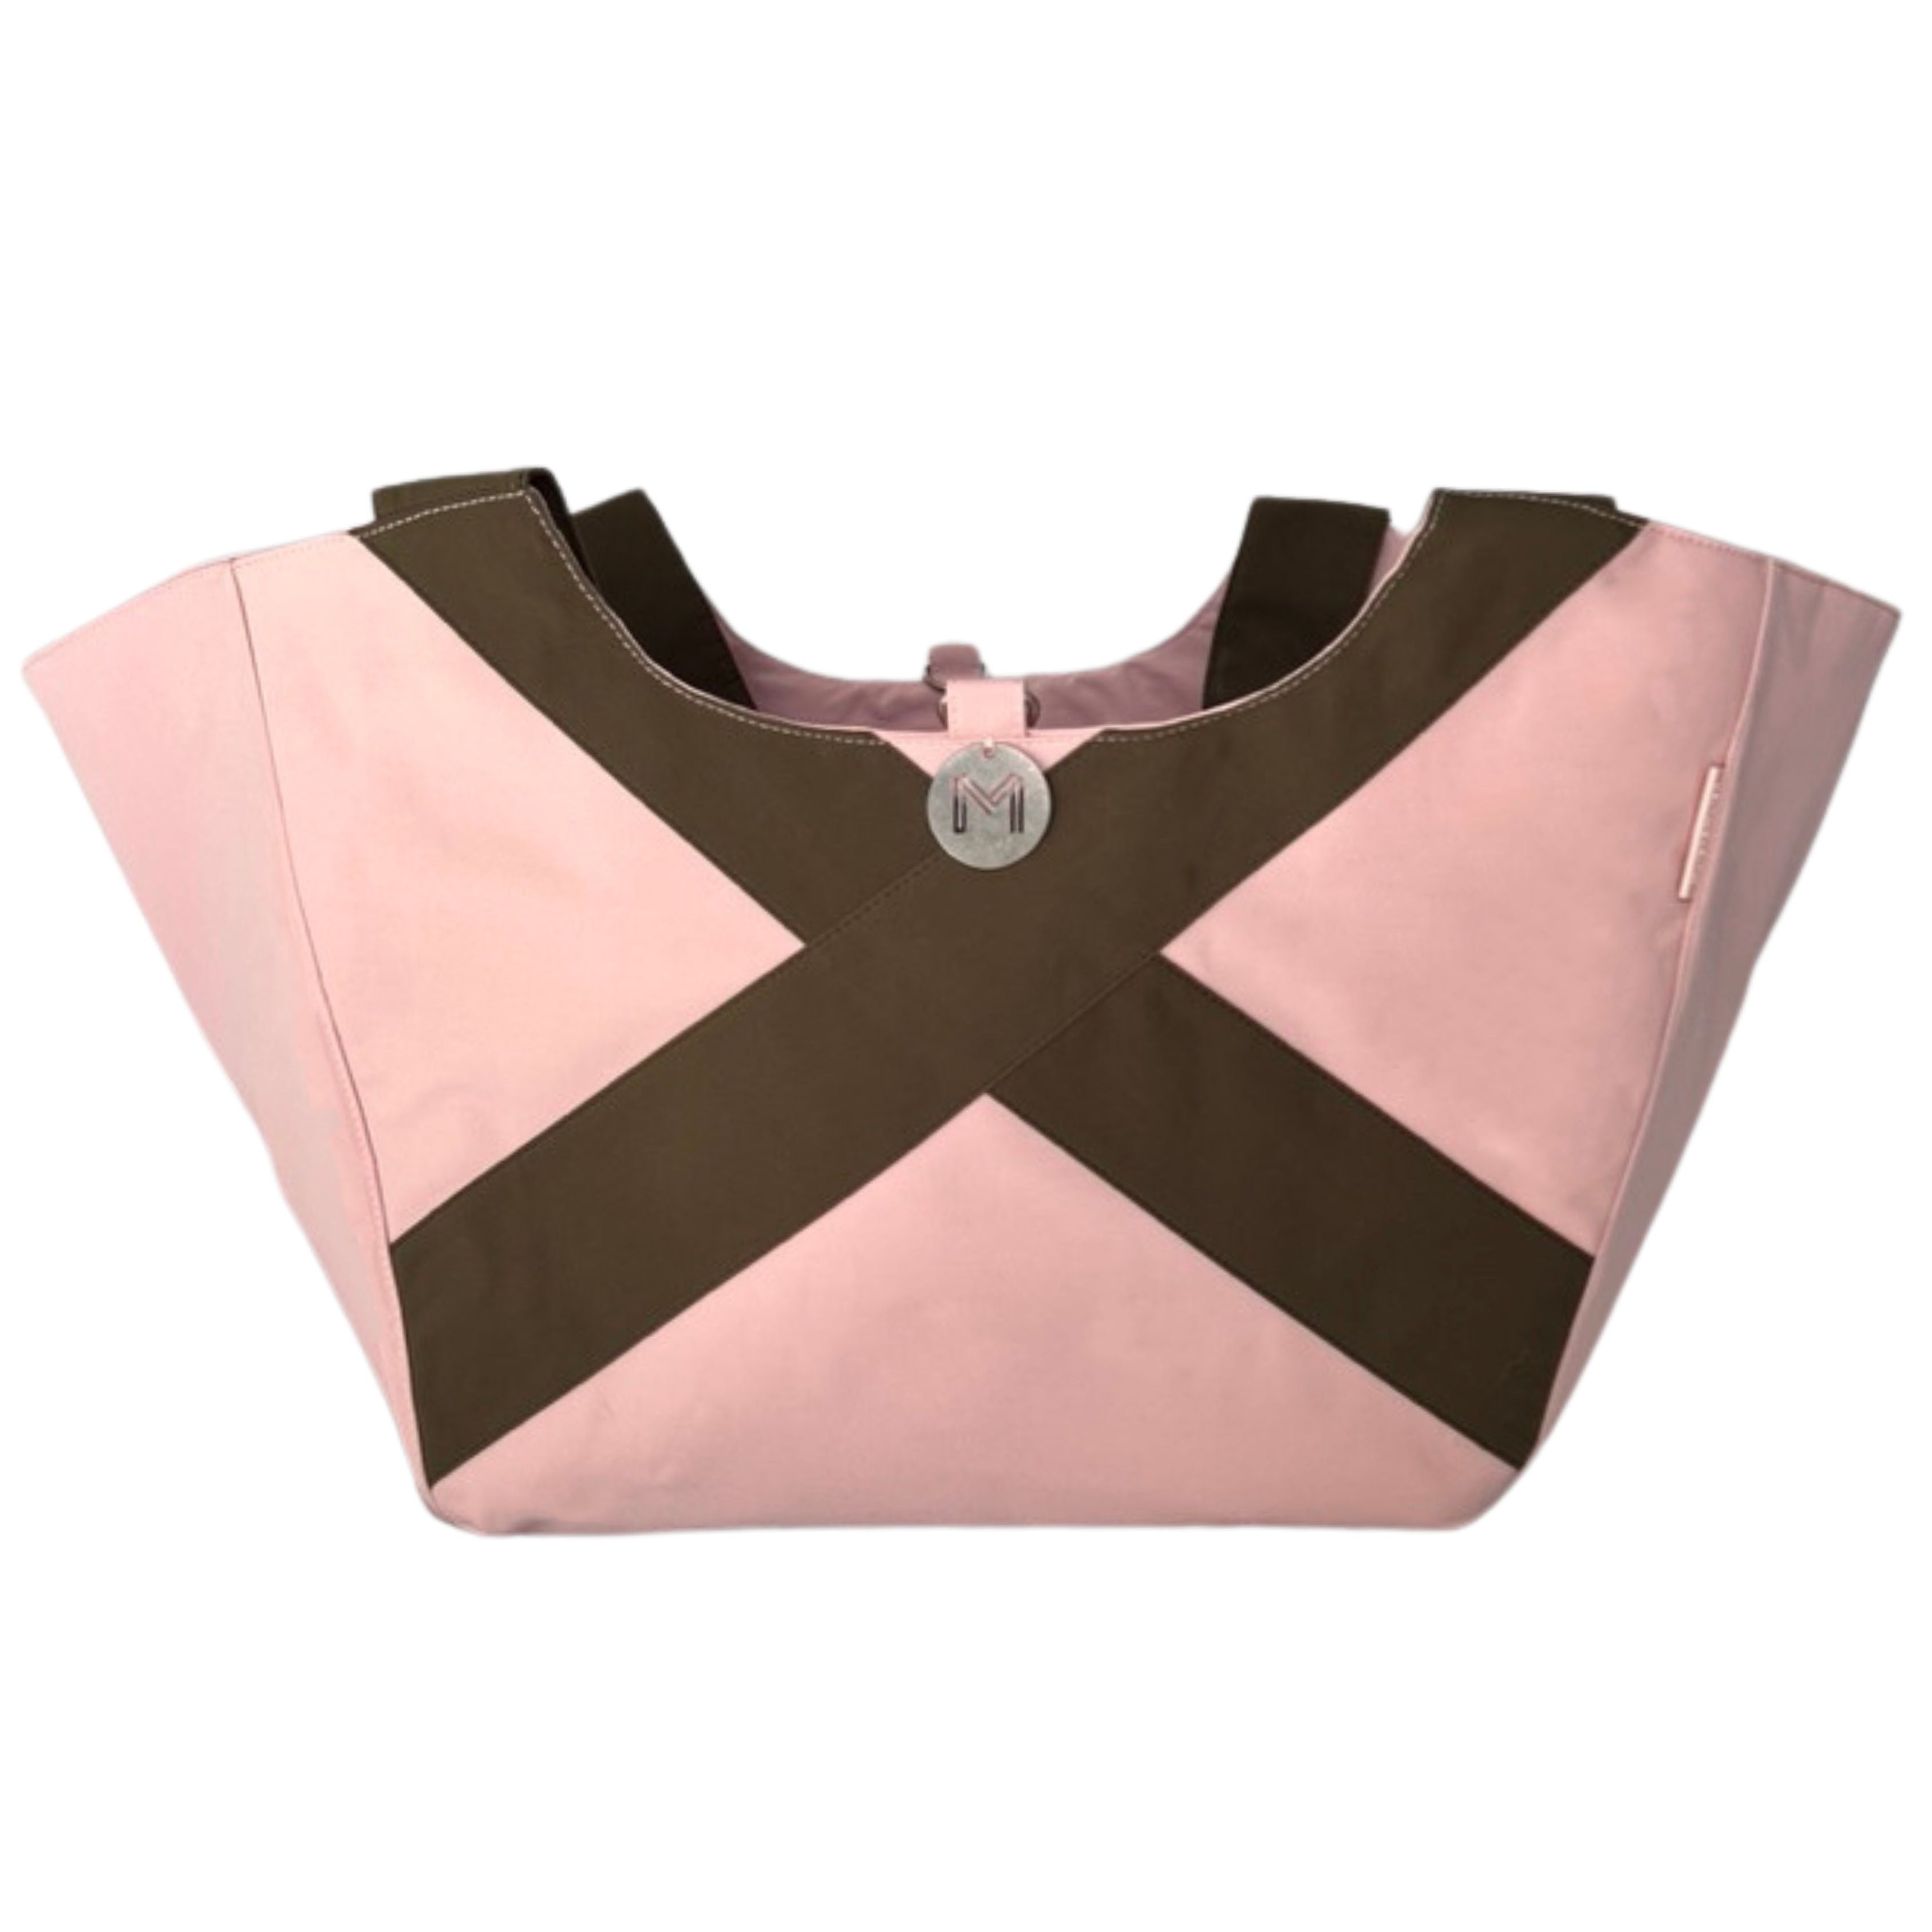 Cove Carry-All - Pastel Pink with Khaki Cross (Limited Edition)